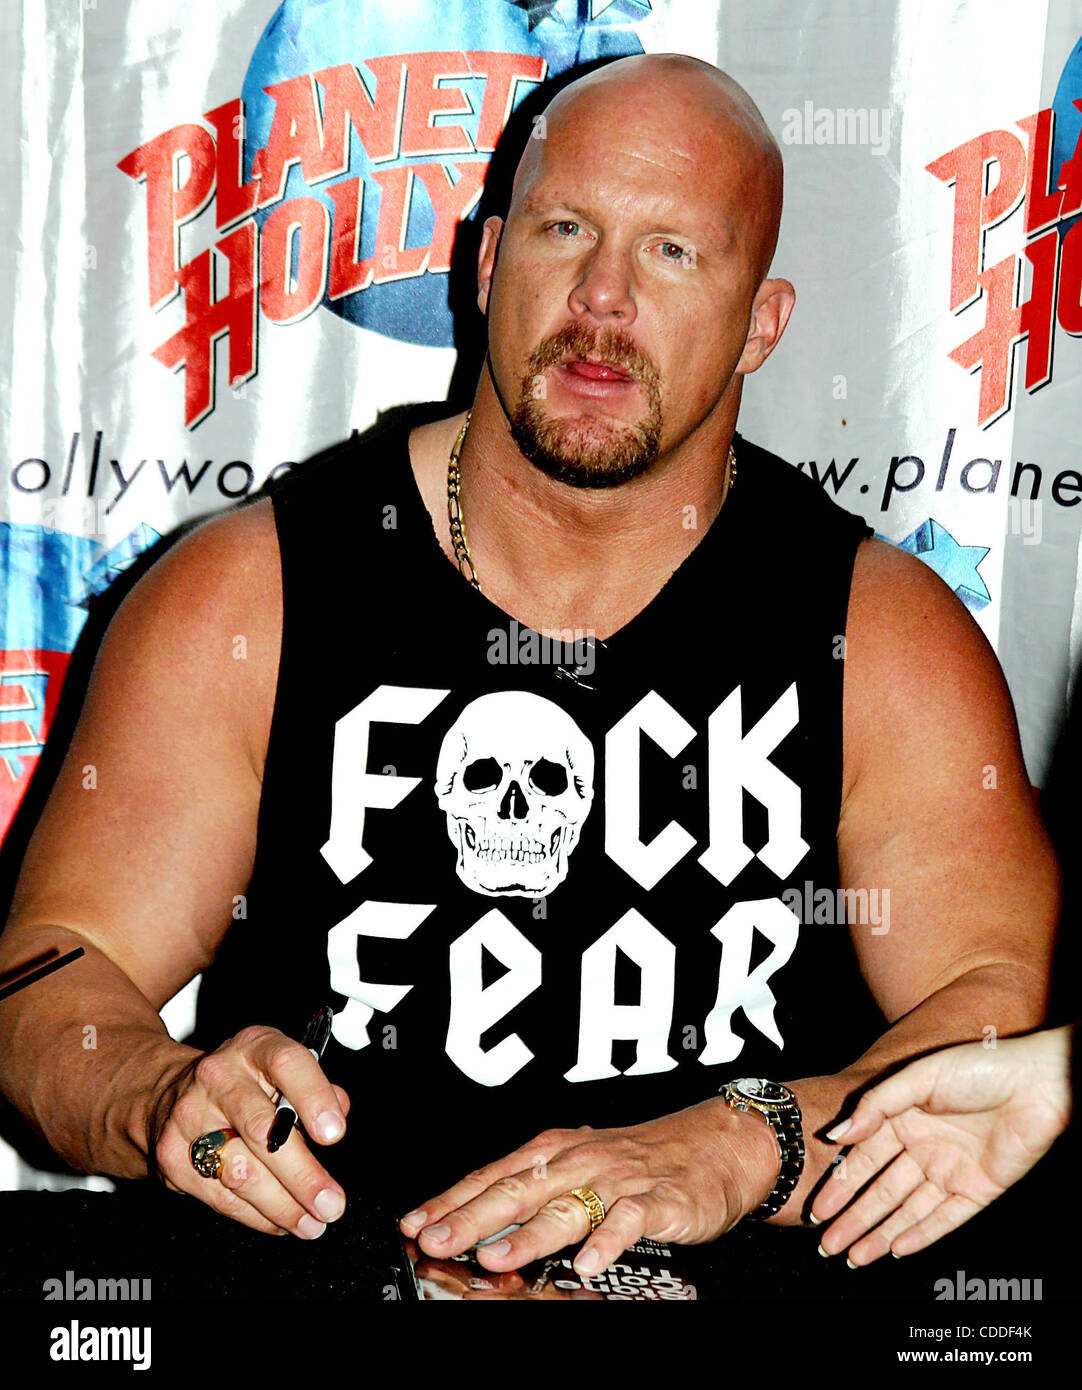 Jan. 1, 2011 - New York, New York, U.S. - K33792RM.WWE SUPERSTAR STONE COLD STEVE AUSTIN SIGNS COPIES OF HIS NEW BOOK ''THE STONE COLD TRUTH'' AT PLANET HOLLYWOOD IN TIMES SQUARE, NEW YORK New York.10/29/2003.  /    2003(Credit Image: Â© Rick Mackler/Globe Photos/ZUMAPRESS.com) Stock Photo